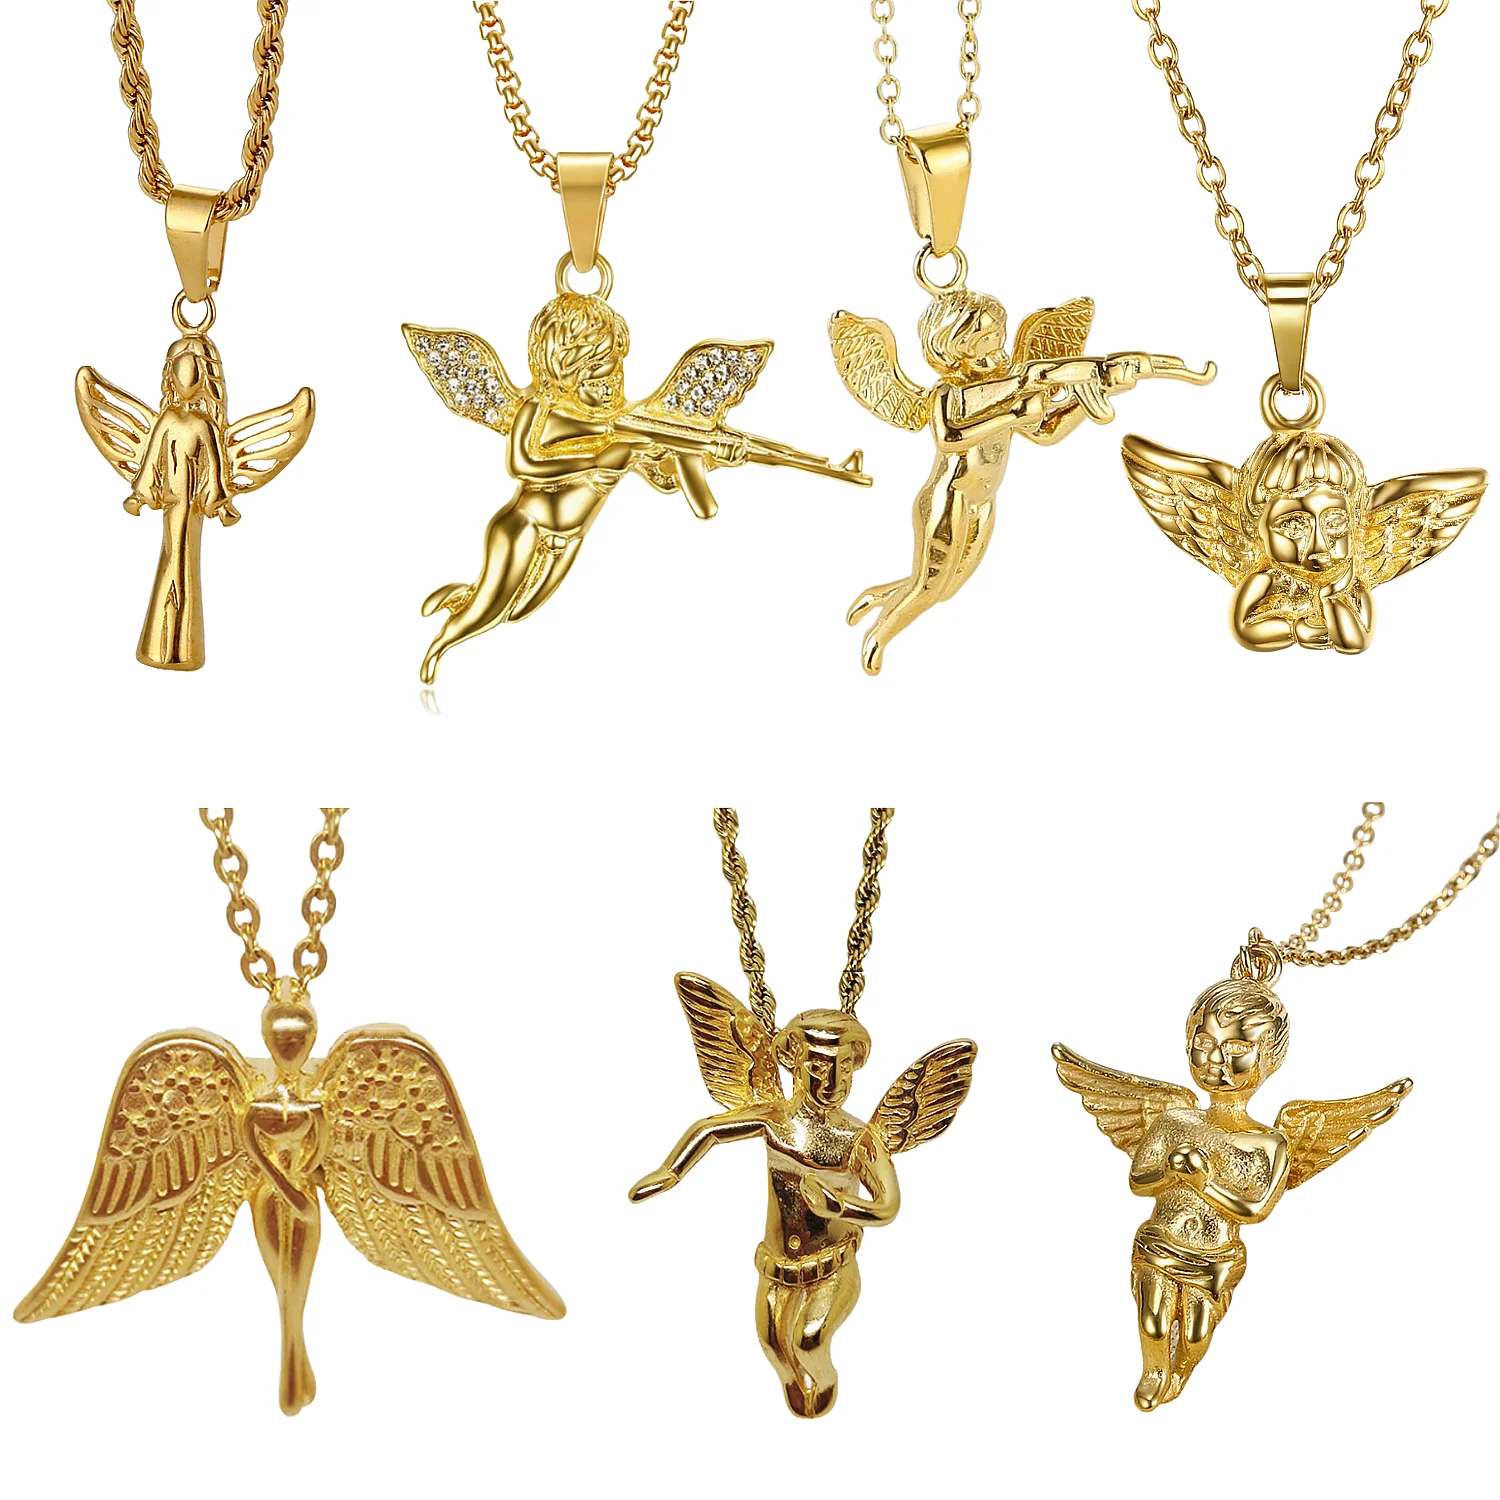 

18k Gold Plated Little Angel With Wings Charm Necklace Cherub Pendant Chain Lovely Wings Cupid Angel Necklace For Girls